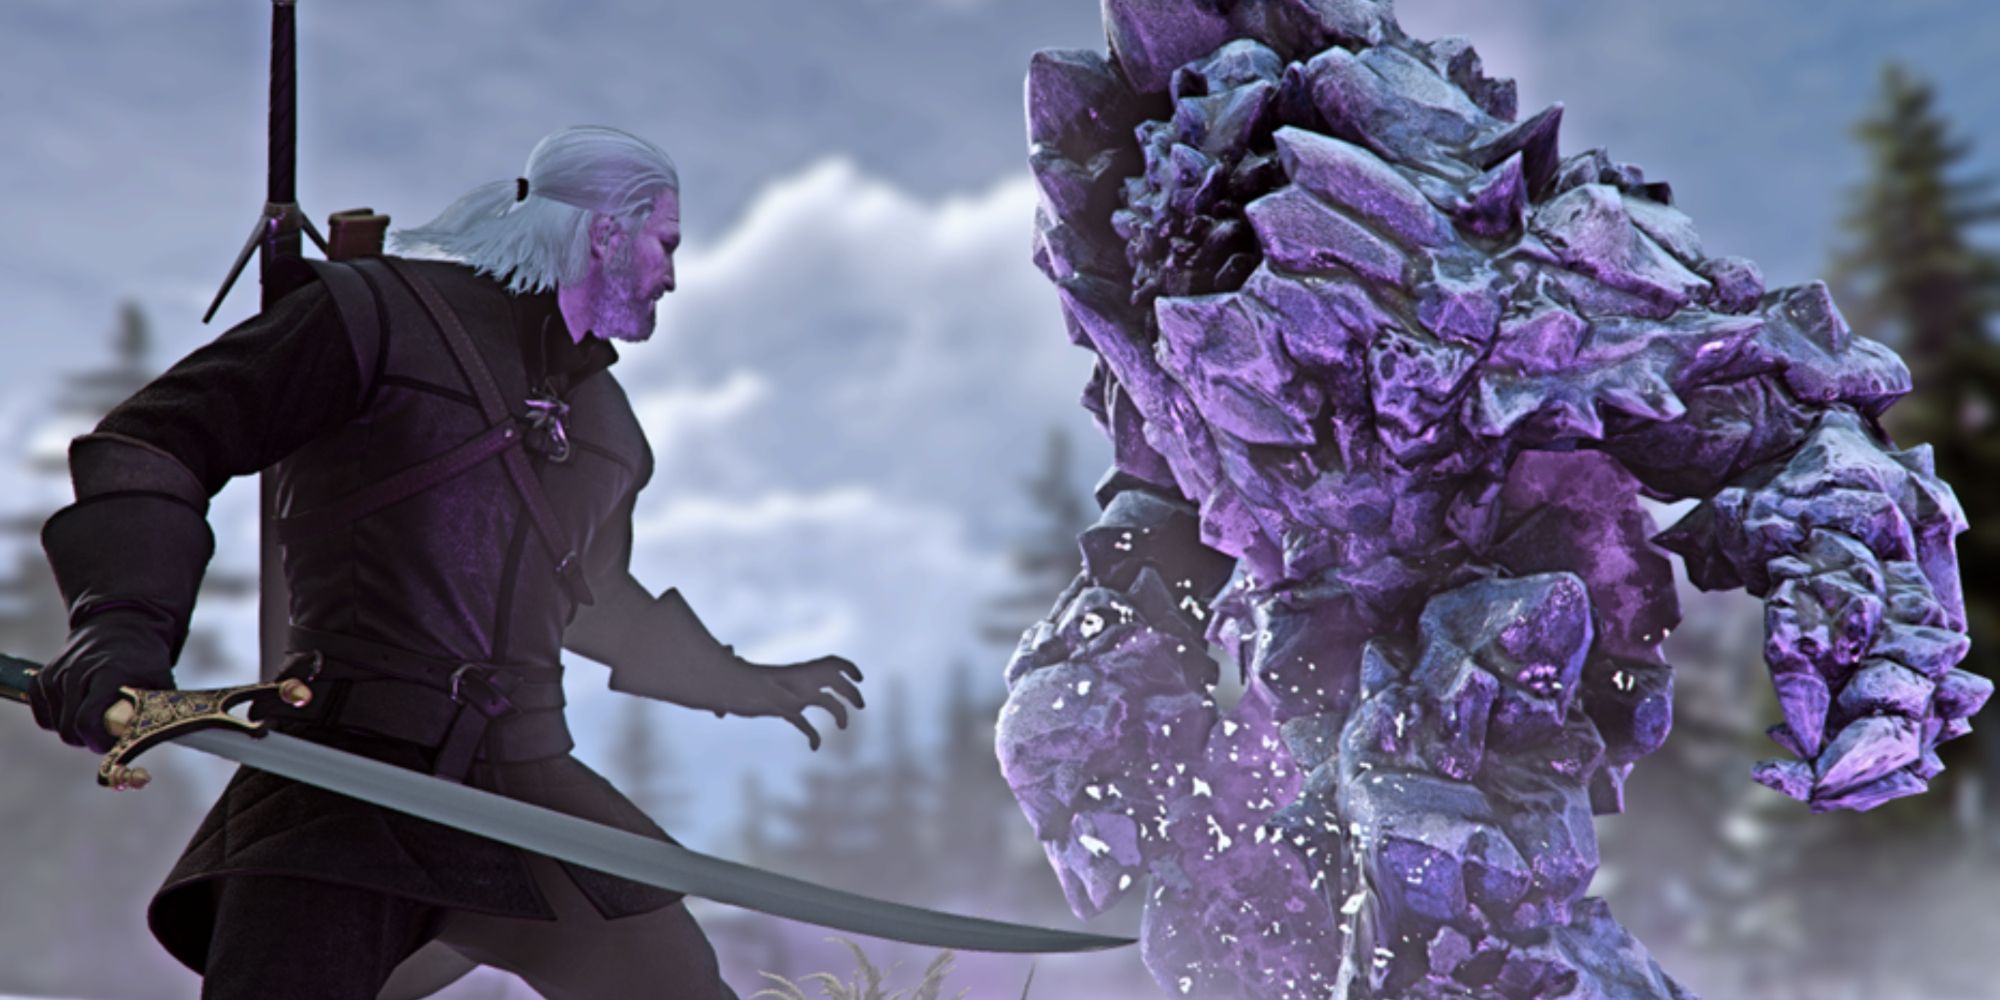 Witcher 3: Geralt facing off against an Ice elemental